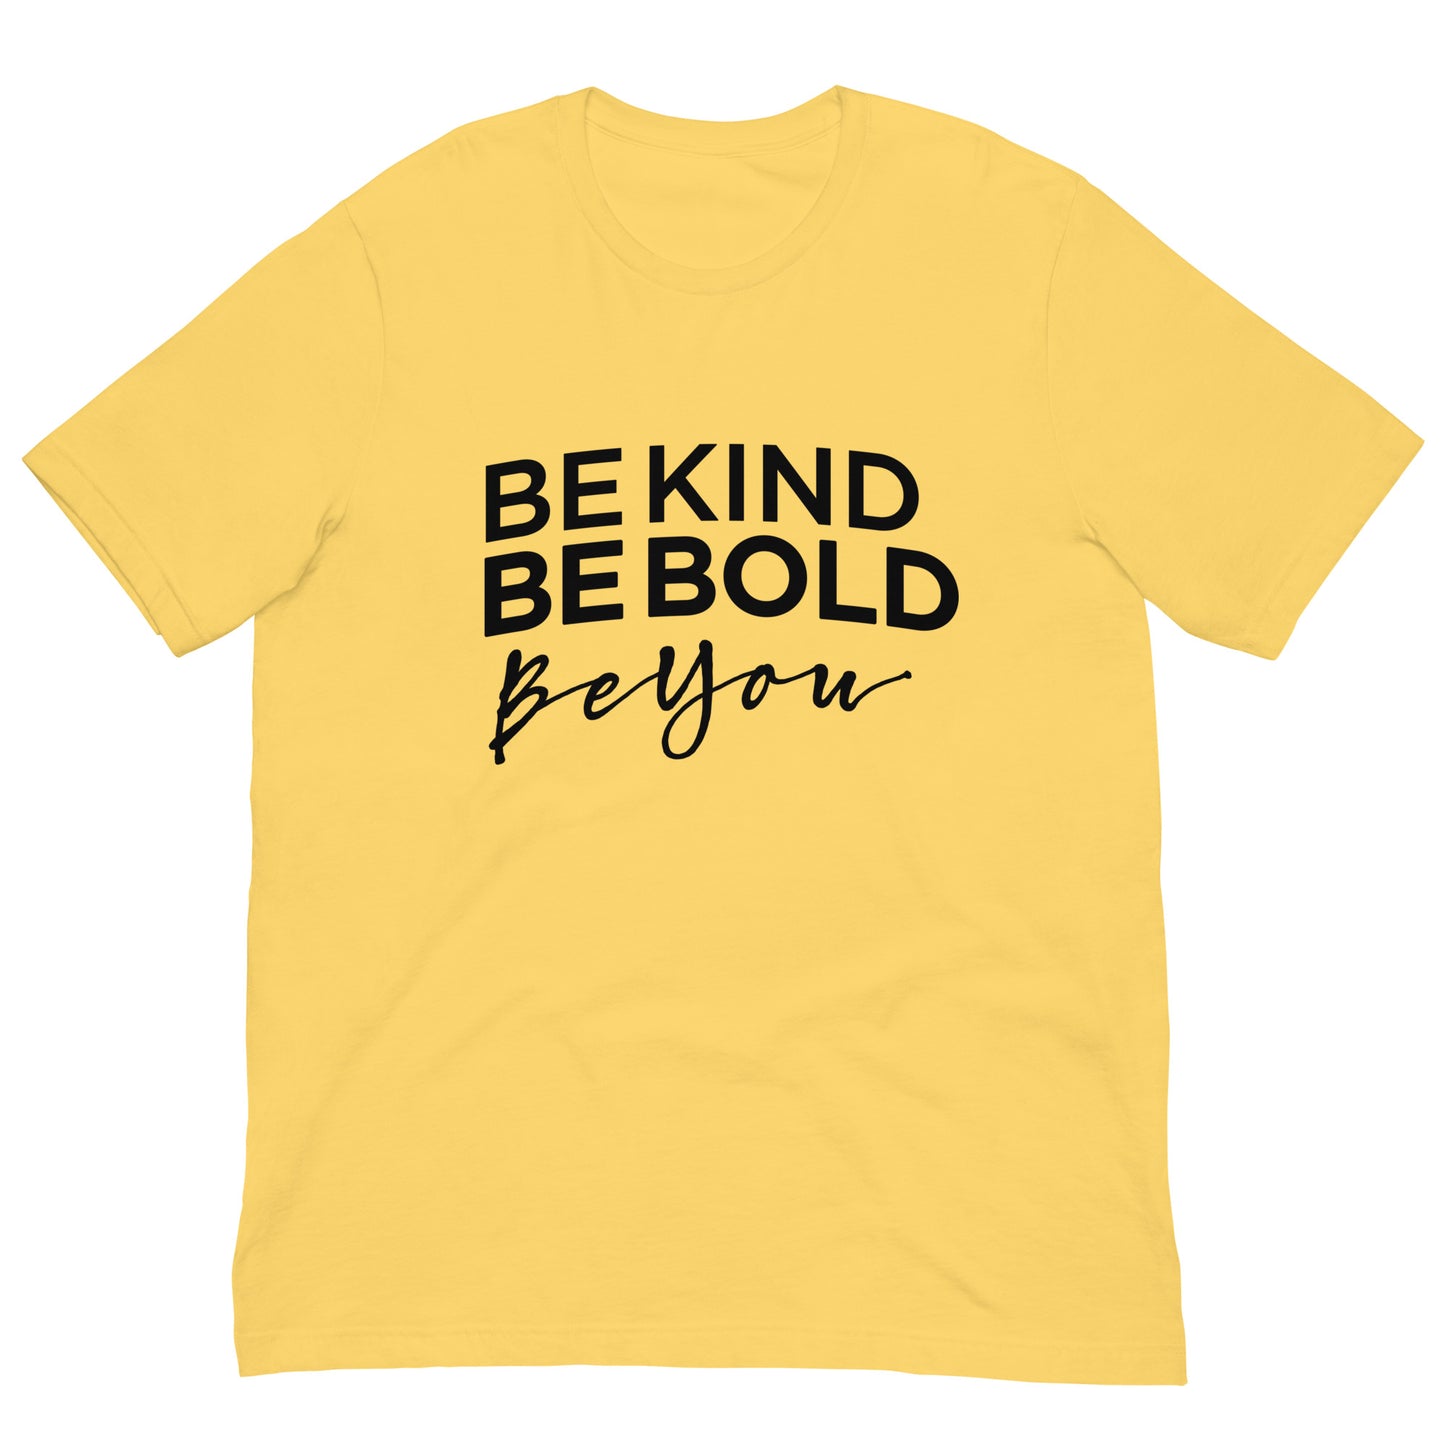 Be Kind Be Bold Be You Tshirt Motivational Graphic Tee Shirt Bella + Canvas Unisex Short Sleeve T-Shirt